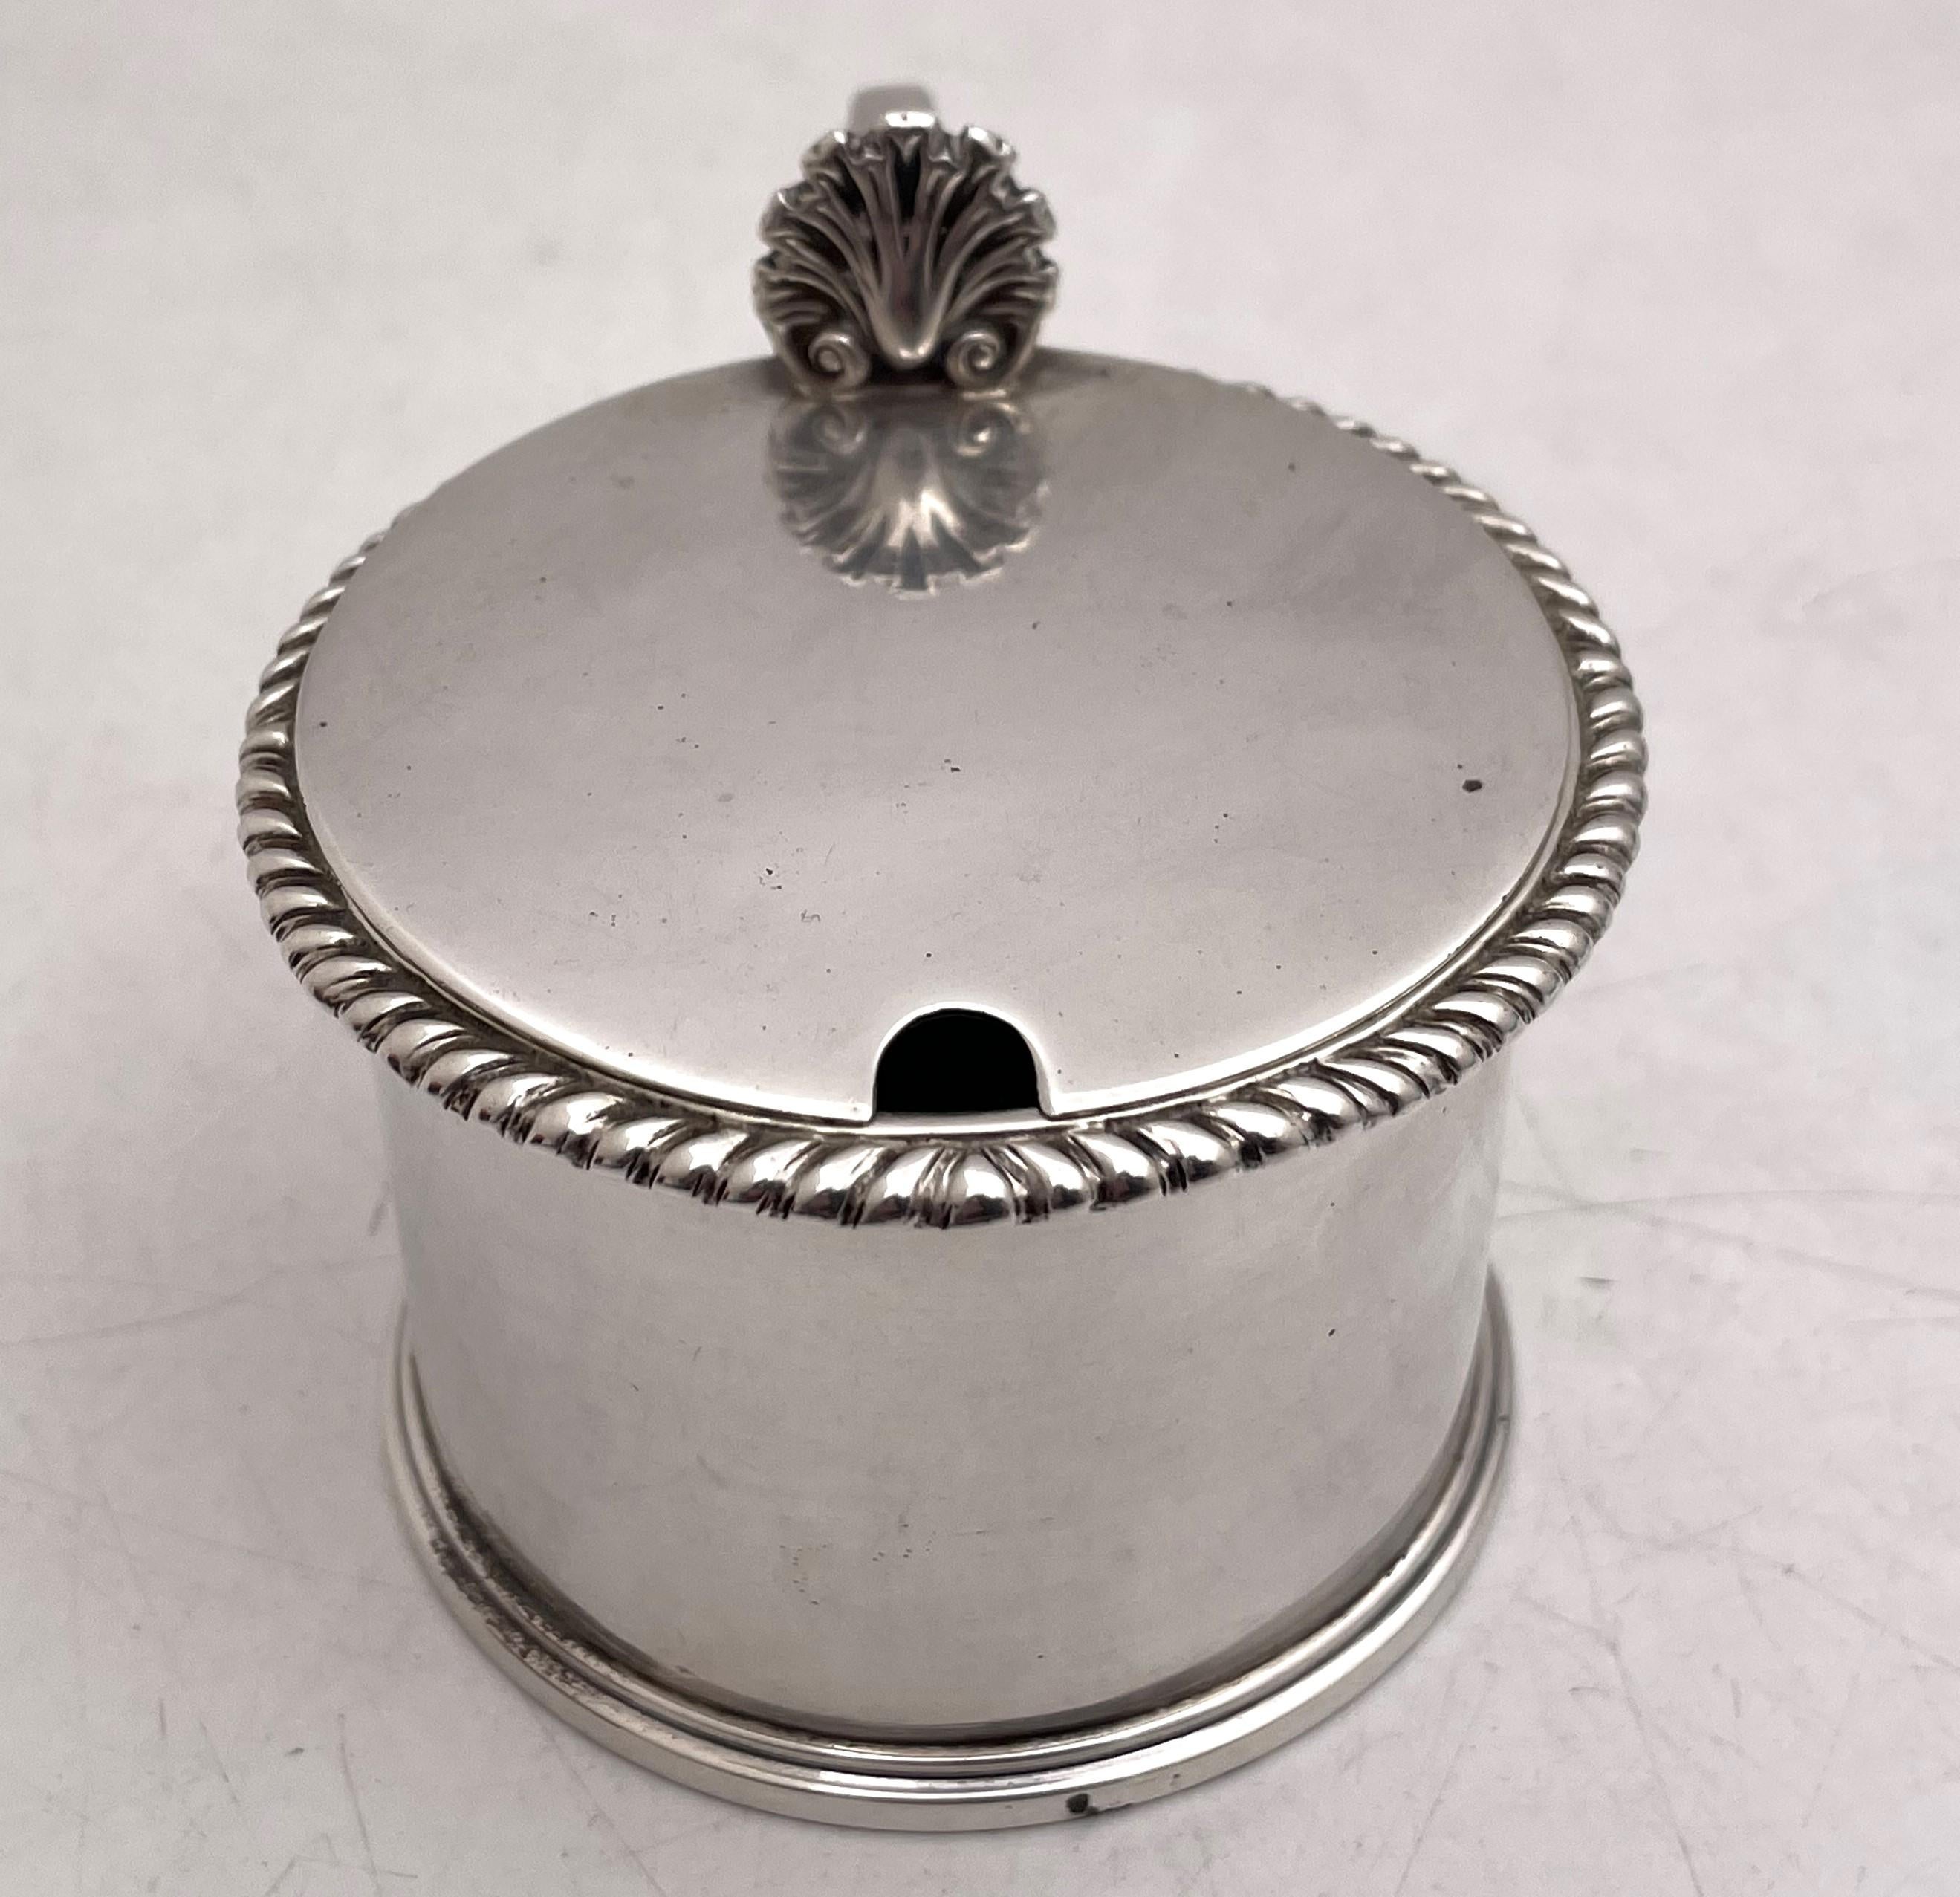 English sterling silver Victorian mustard pot from 1890 with a gadrooned rim, sold with a cobalt glass liner and sterling silver spoon. It measures 3 7/8'' from handle to spout by 2 3/4'' in height. The spoon measures 3 1/2'' in length. Hallmarks